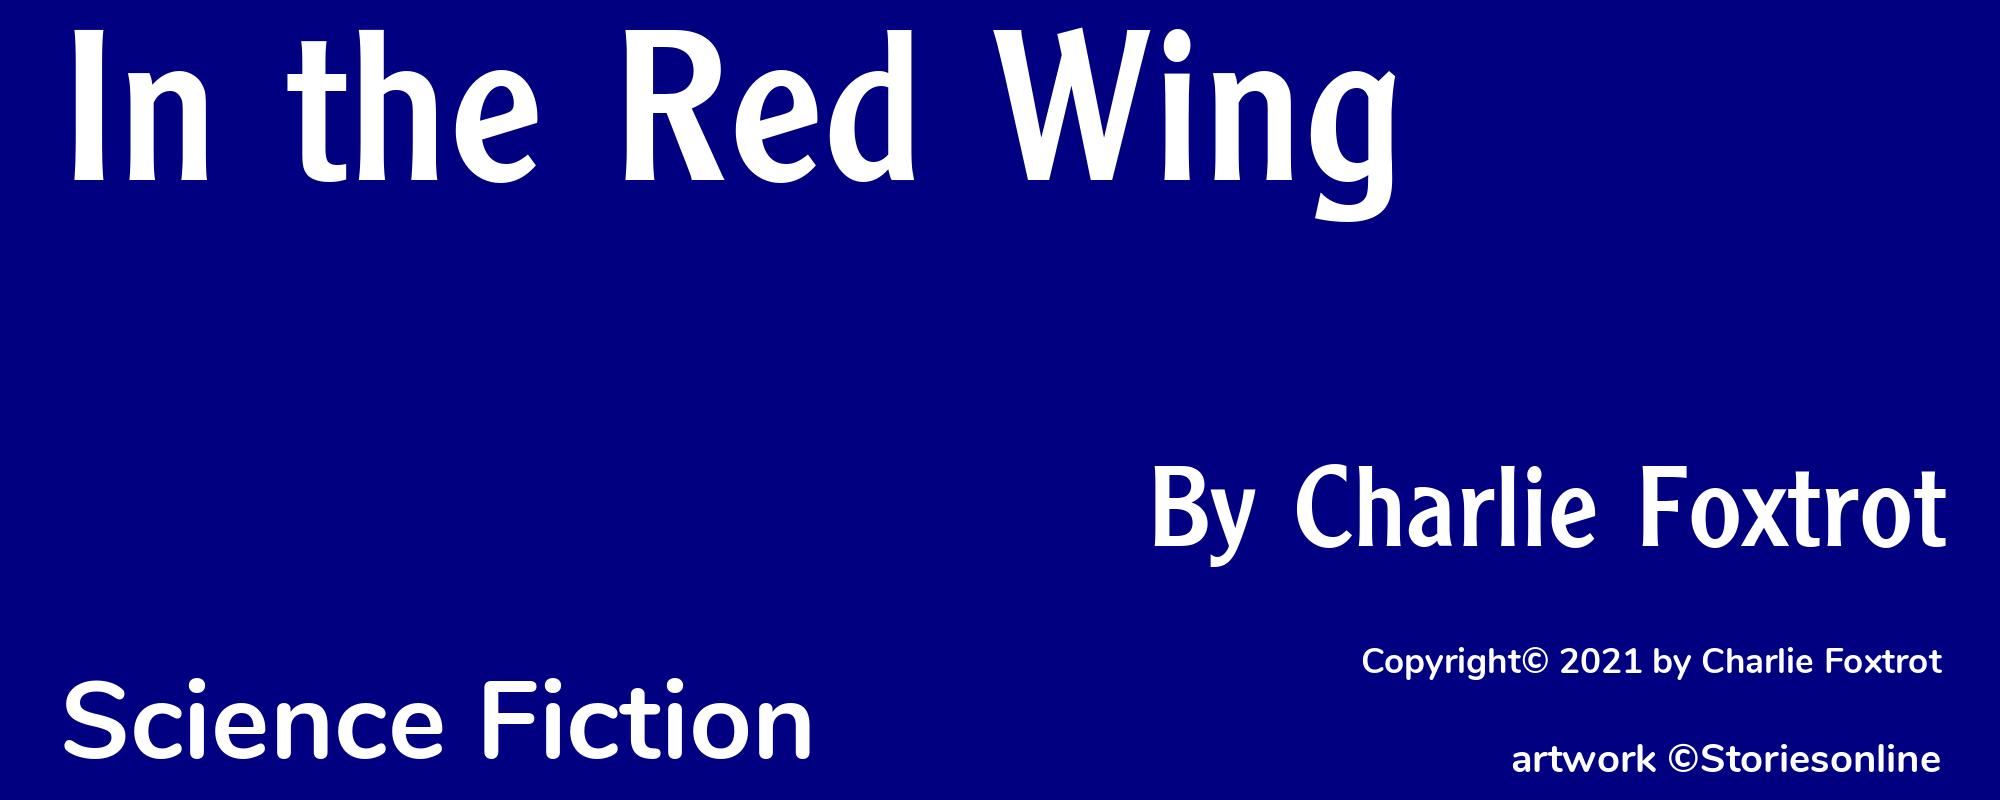 In the Red Wing - Cover